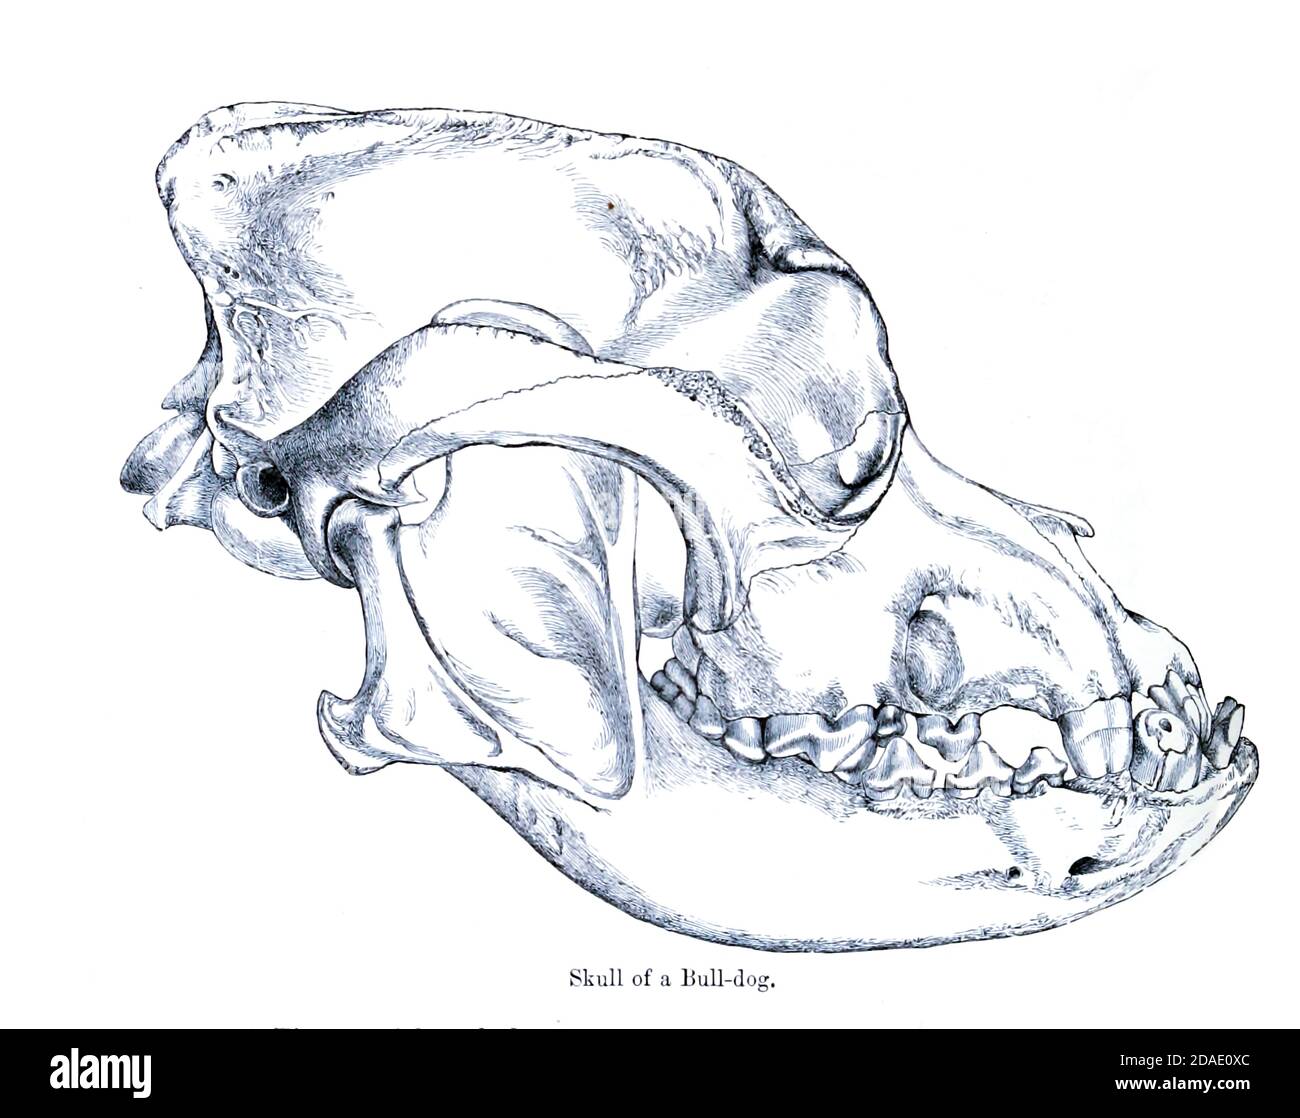 Side view of a Skull of a Bull Dog [Bulldog] From the Book Dogs, Jackals, Wolves and Foxes A Monograph of The Canidae [from Latin, canis, 'dog') is a biological family of dog-like carnivorans. A member of this family is called a canid] By George Mivart, F.R.S. with woodcuts and 45 coloured plates drawn from nature by J. G. Keulemans and Hand-Coloured. Published by R. H. Porter, London, 1890 Stock Photo